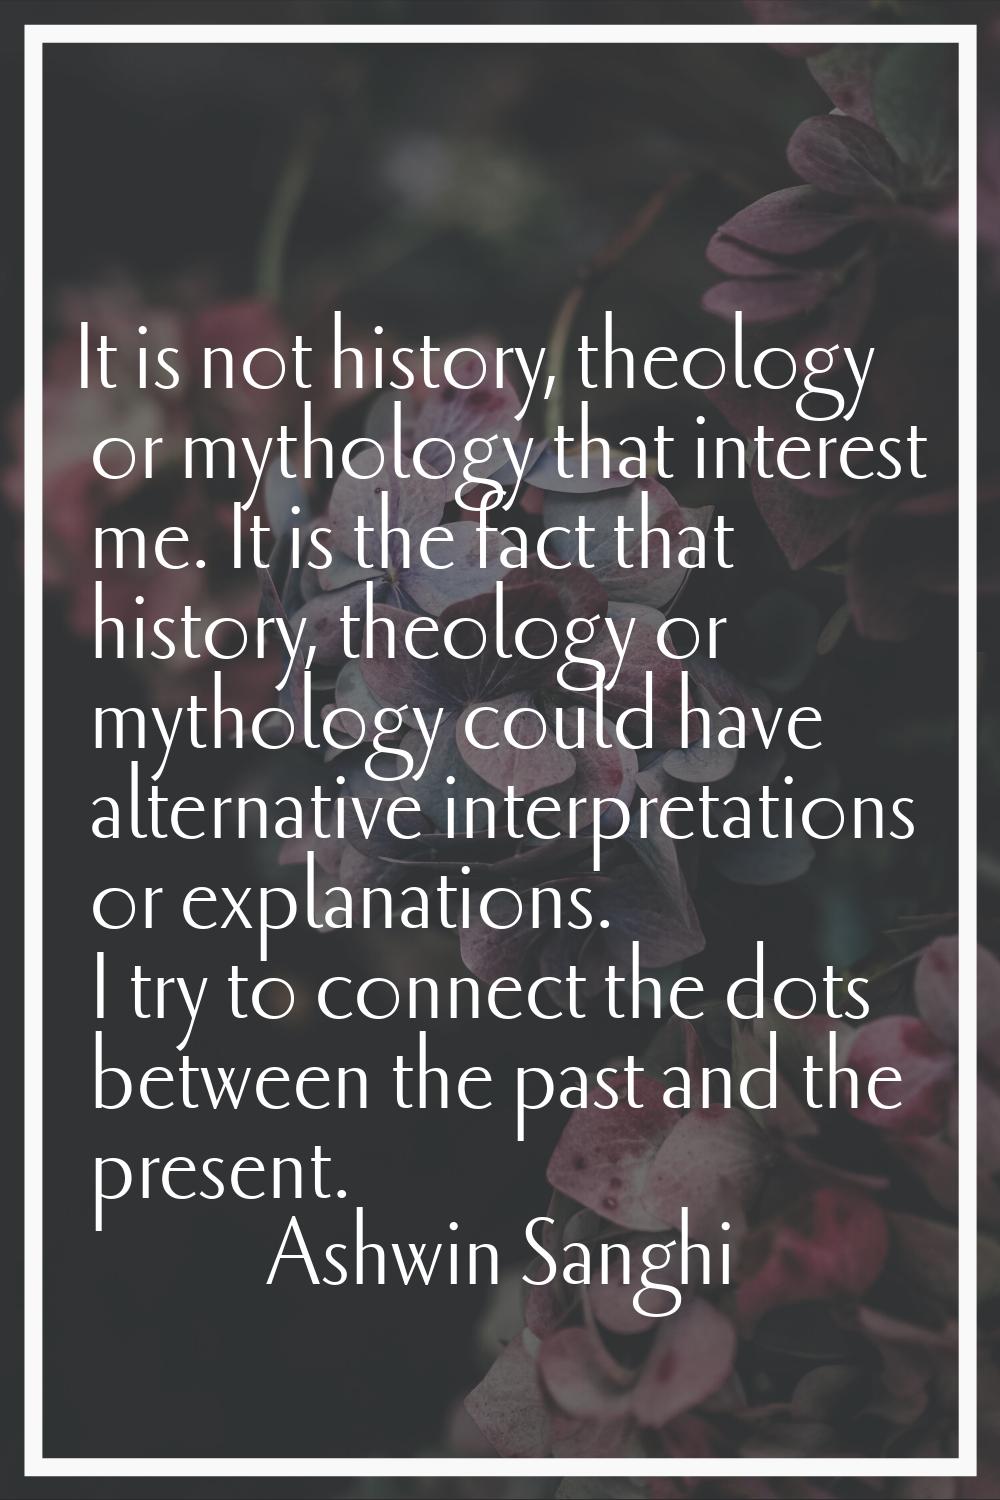 It is not history, theology or mythology that interest me. It is the fact that history, theology or